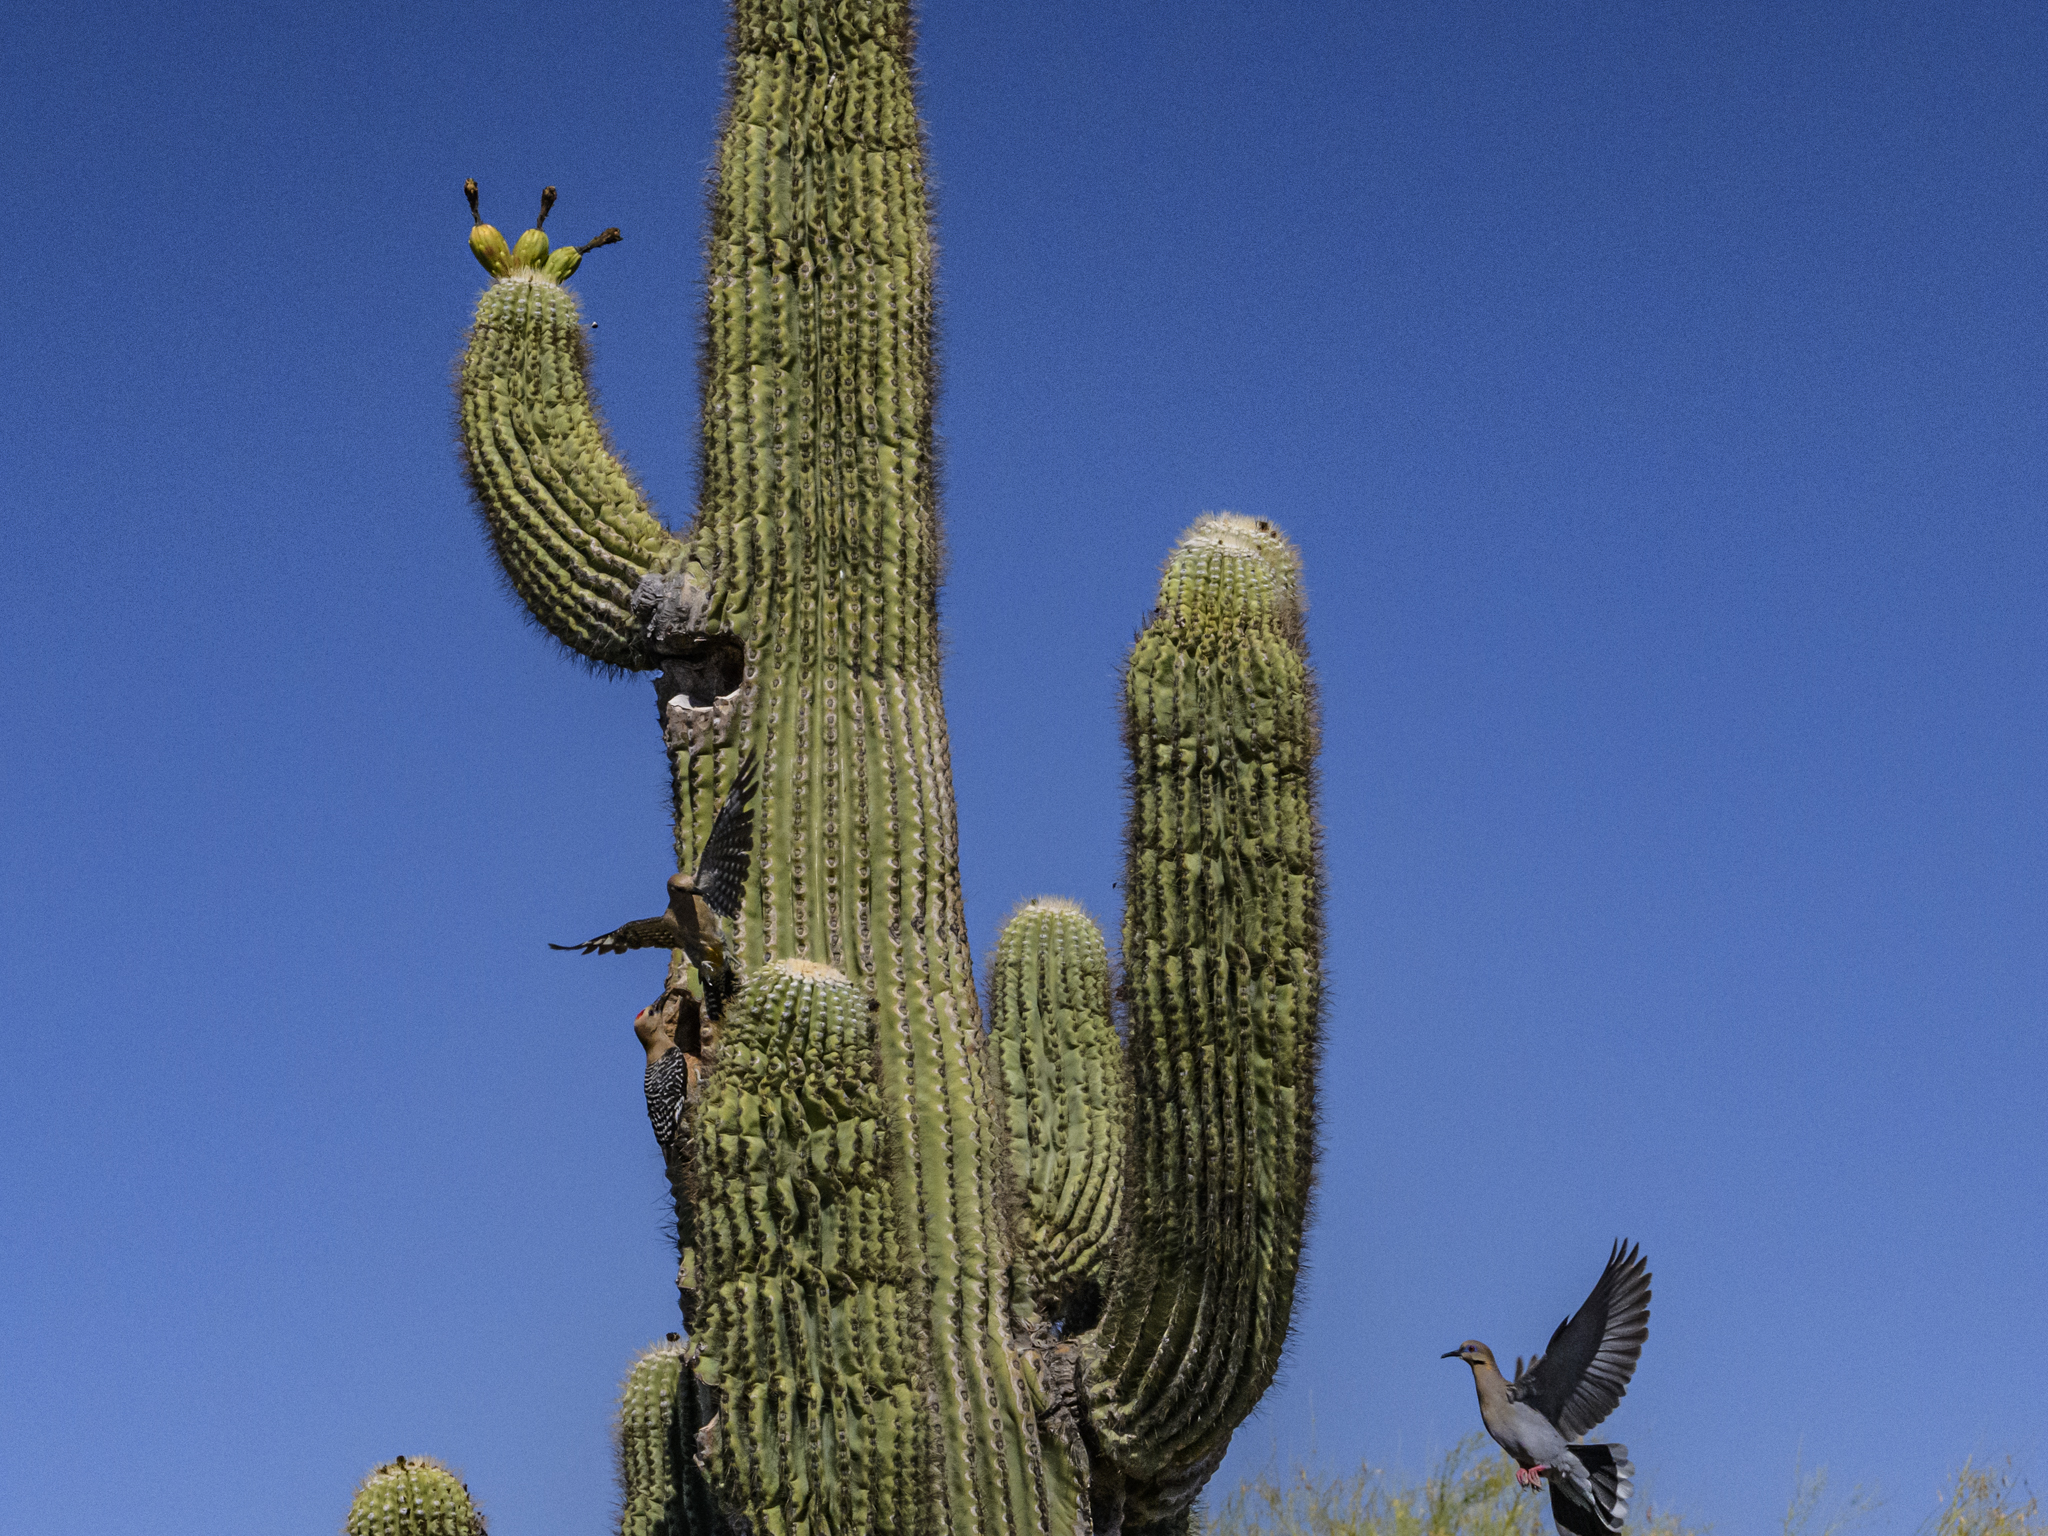 Photo by Malrin D. Mills  |  Gila Woodpeckers defending their nest from an unlikely predator, a White Winged Dove. The dove is actually defending his own nest on the other side of the saguaro cactus. They took turns chasing other away most of the afternoon.